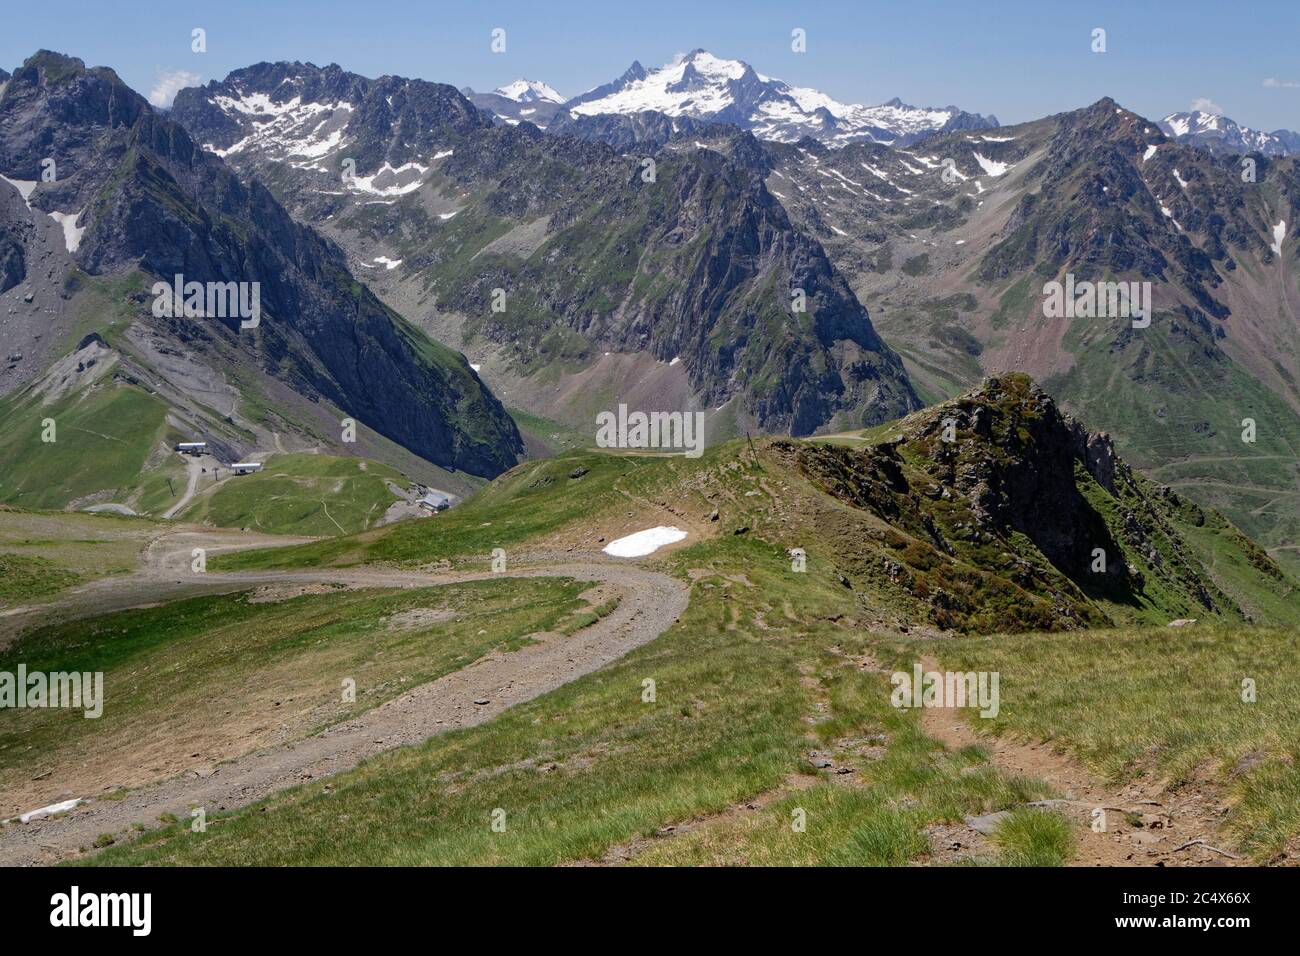 Mountain landscape at Col du Tourmalet. It is the highest paved mountain pass in the French Pyrenees, at 2115 m. Stock Photo